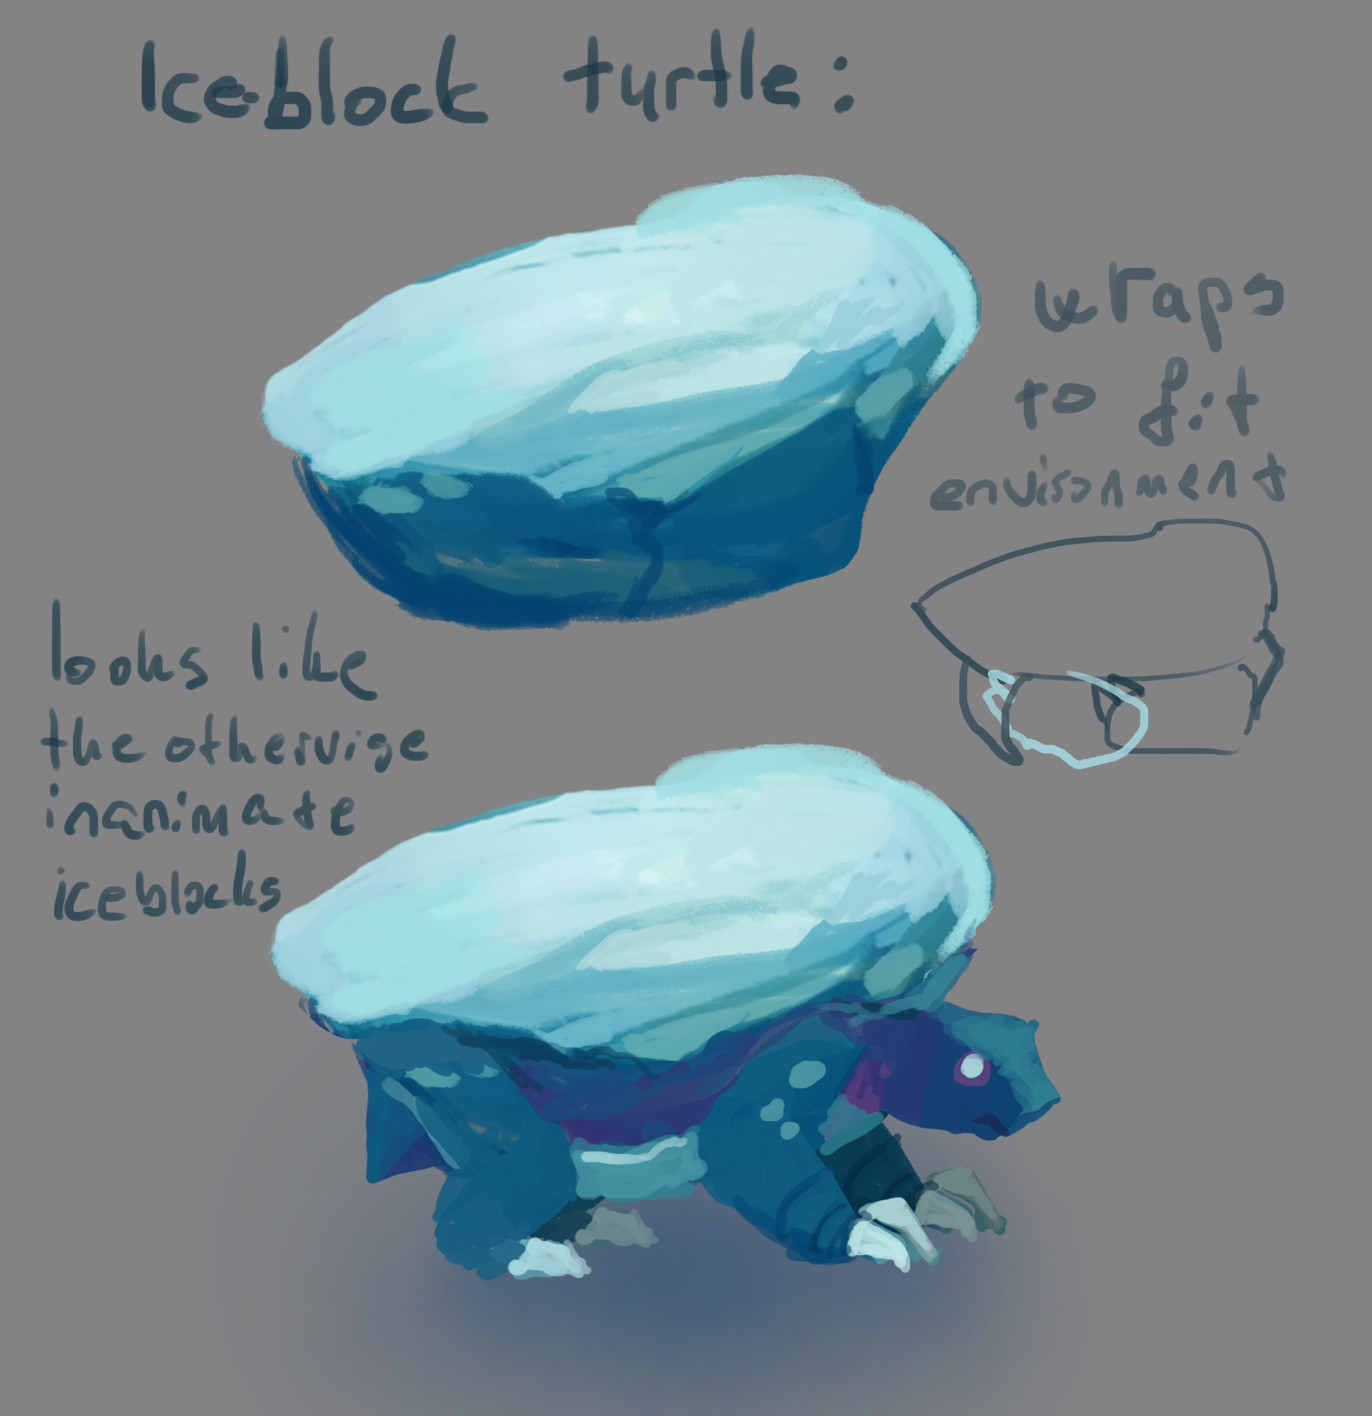 Iceblock turtle. Some of the rocky things are alive!